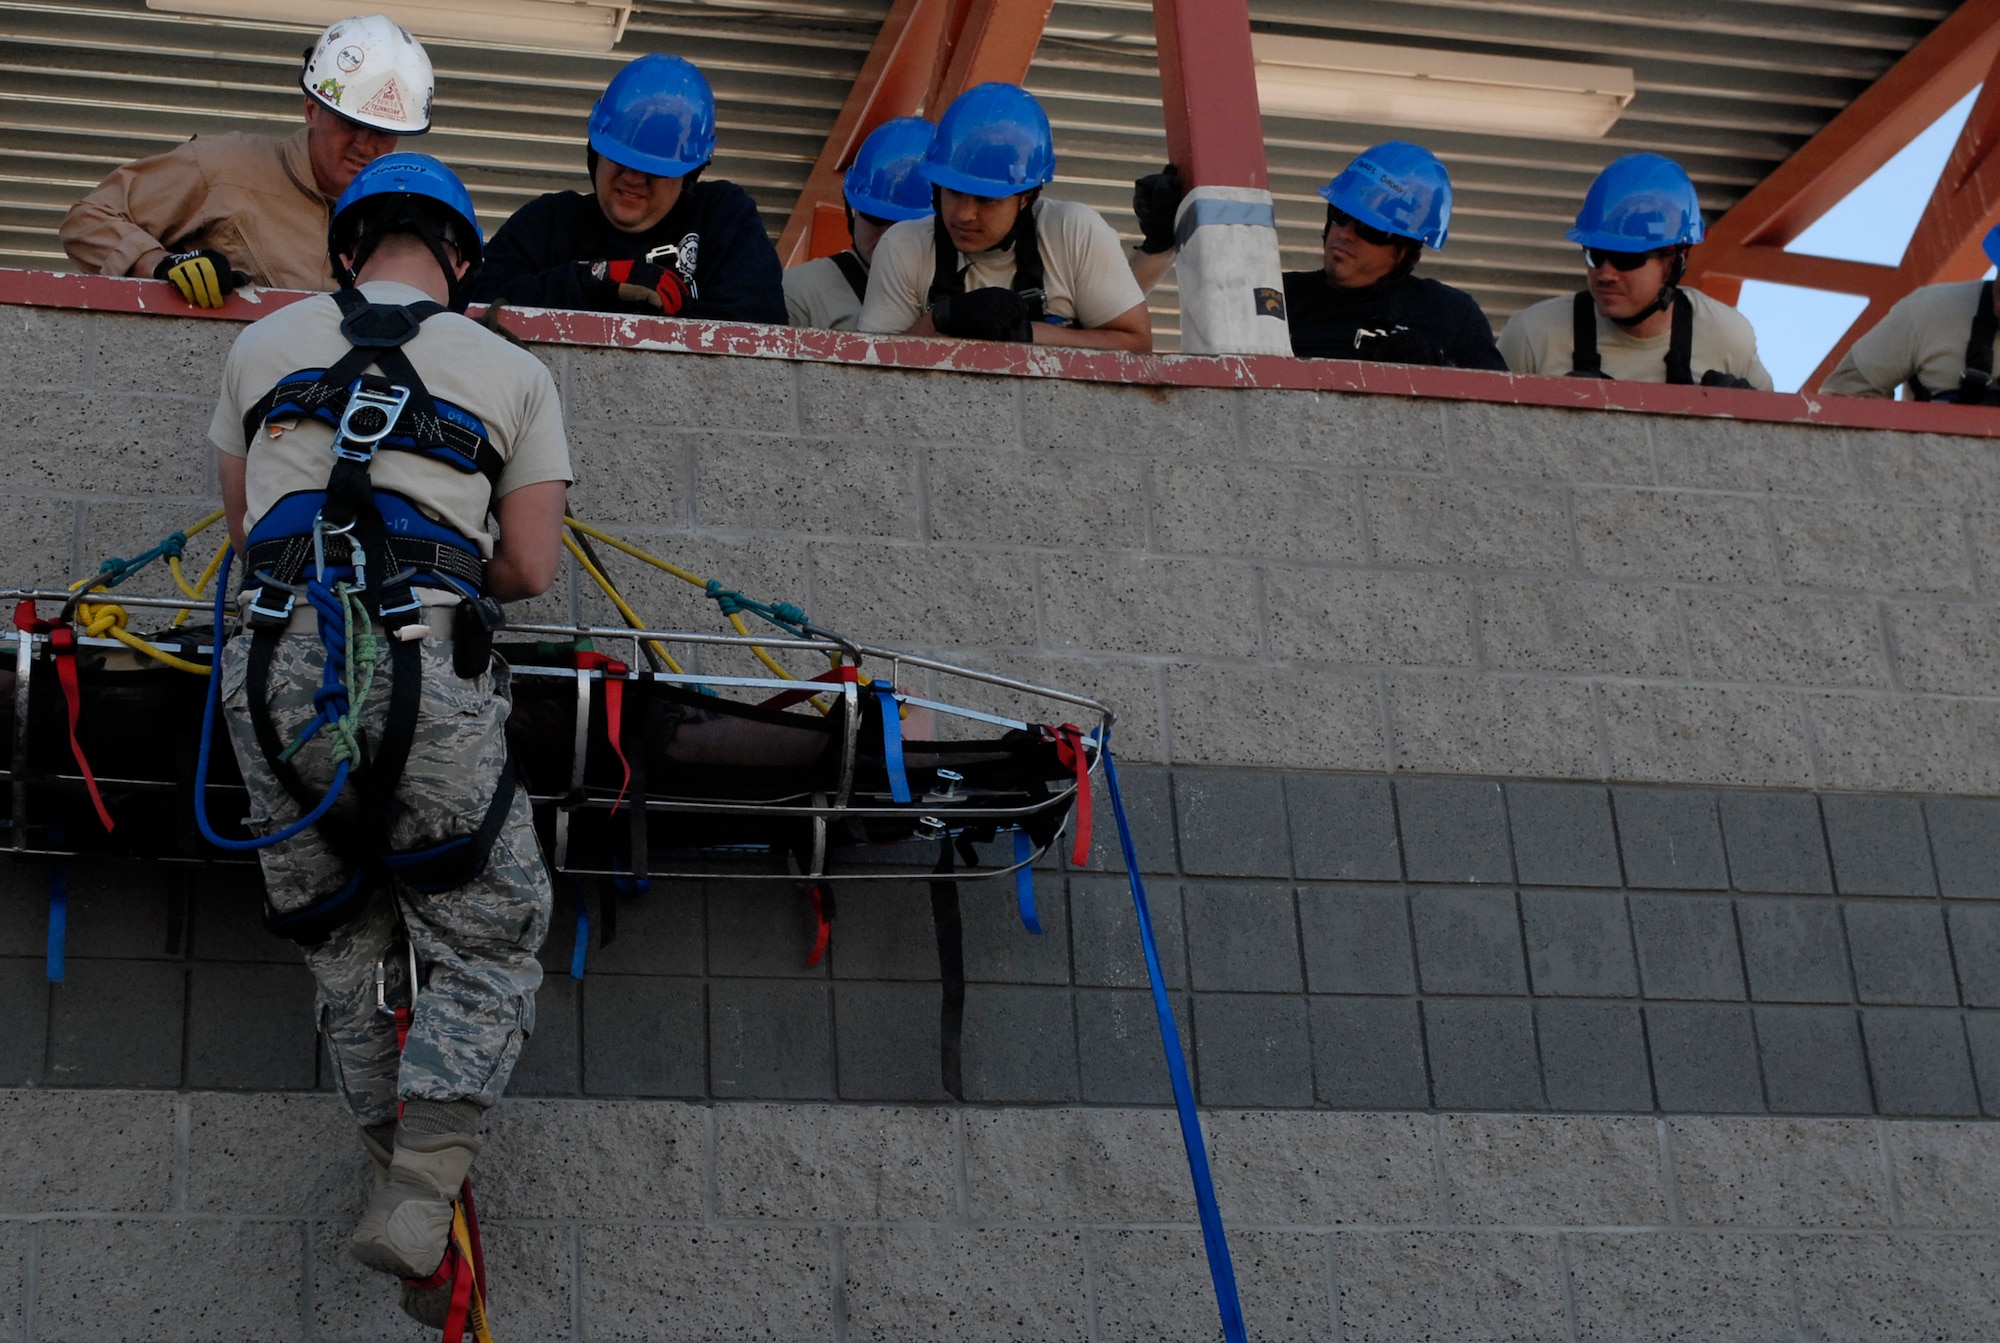 Instructor Joe Gomos, 312th Training Squadron, Goodfellow Air Force Base, Texas, instructs Senior Airman Donie Novotny, 56th Civil Engineer Squadron, on how to perform a basket operation Jan. 20th during the Rescue Technician 1 Course held at the Glendale Regional Public Safety Training Center.  (U.S. Air Force photo/Airman 1st Class Sandra Welch)